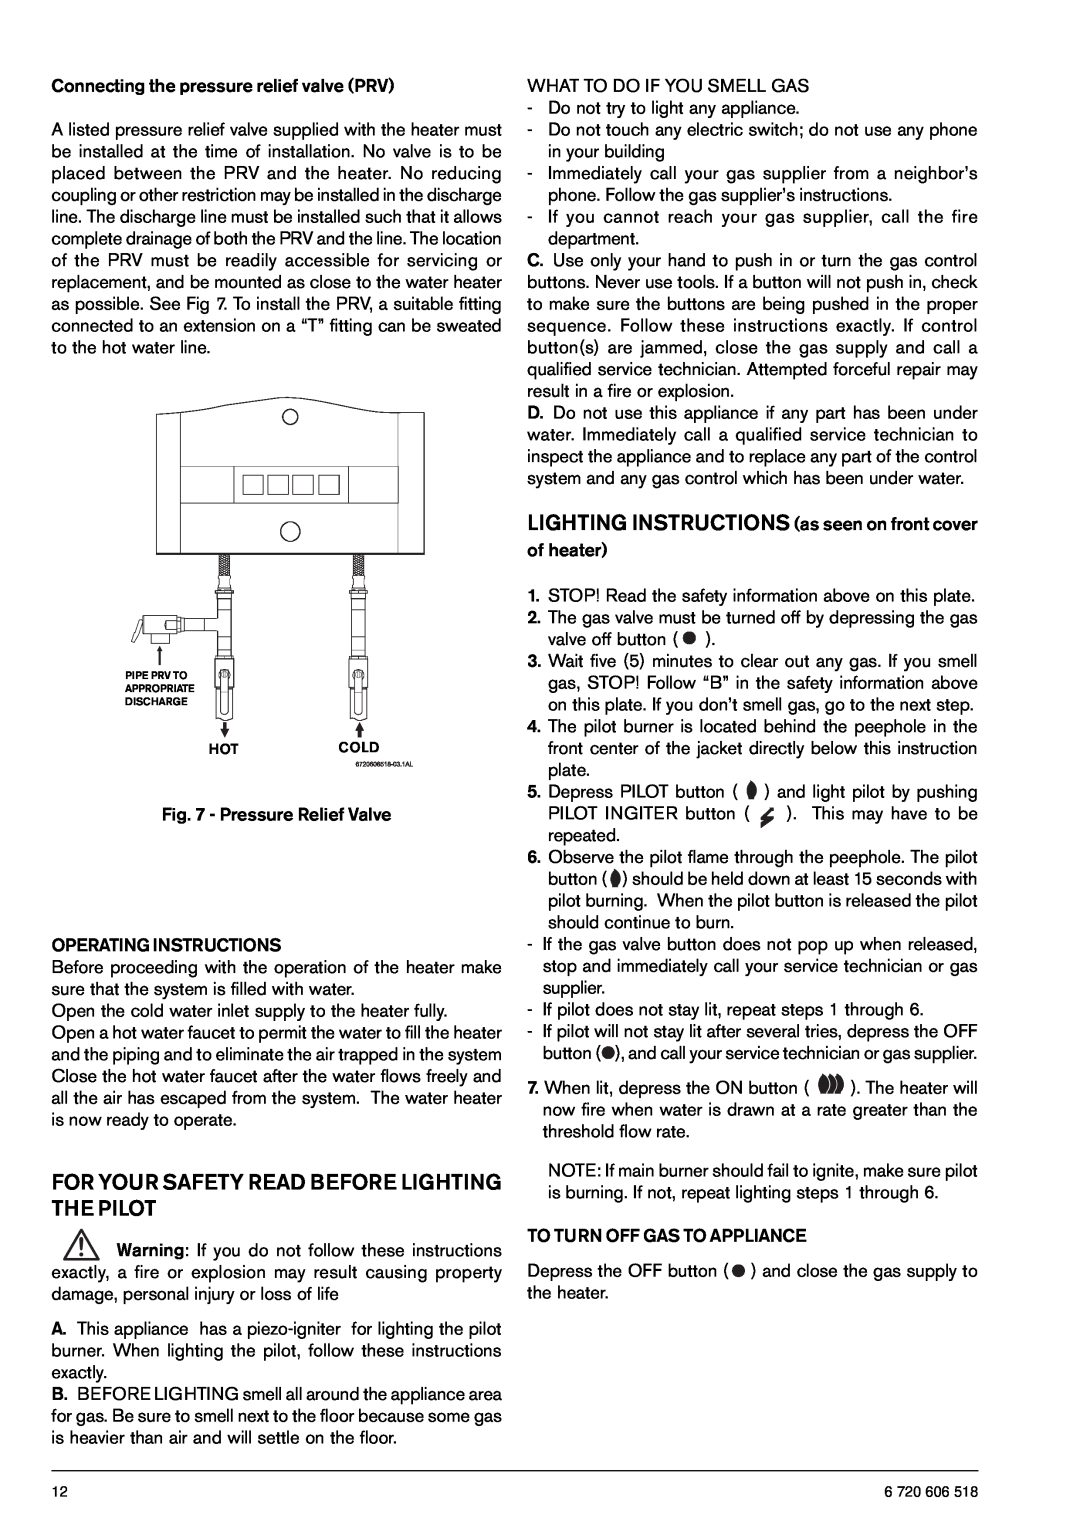 AquaStar 125B NGS specifications For Your Safety Read Before Lighting The Pilot, Hotcold 